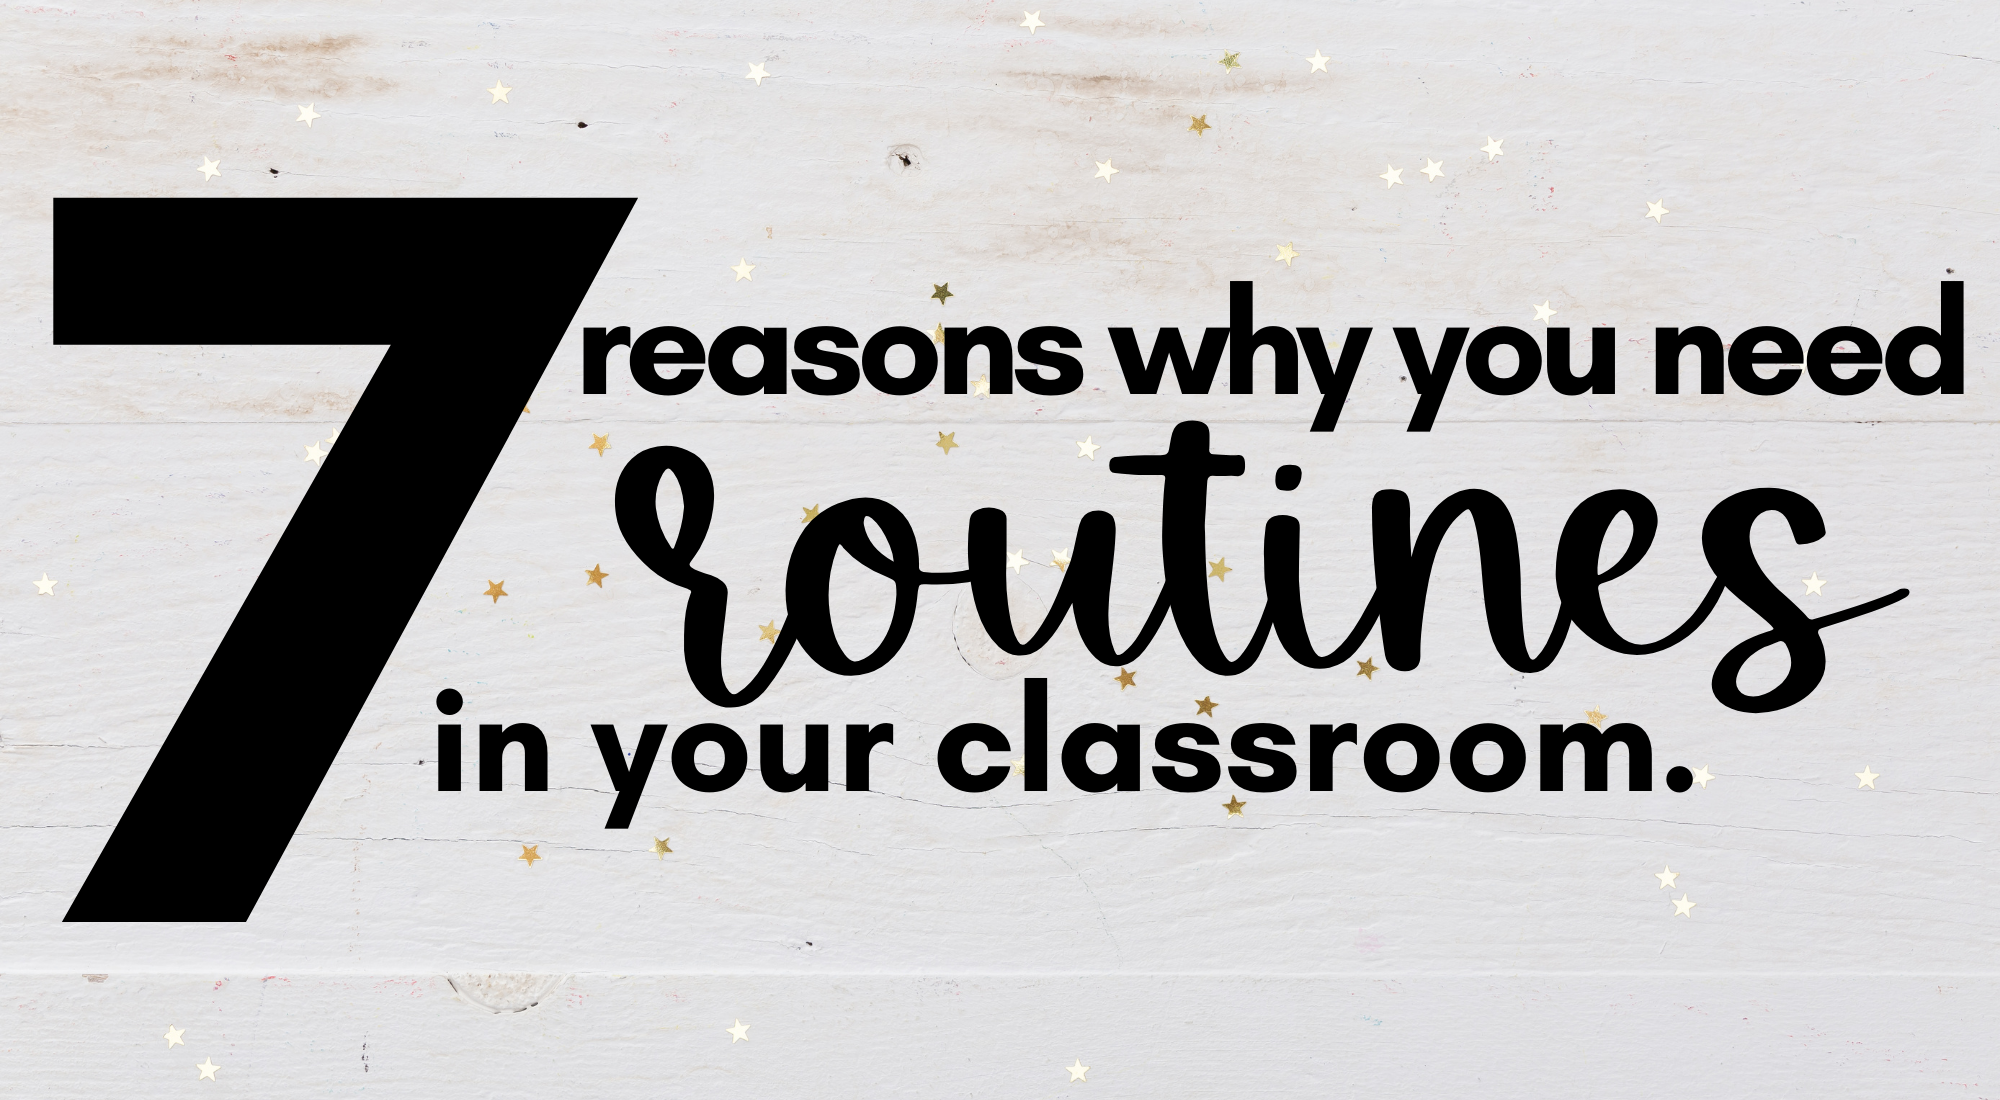 7 reasons why you need routines in your classroom